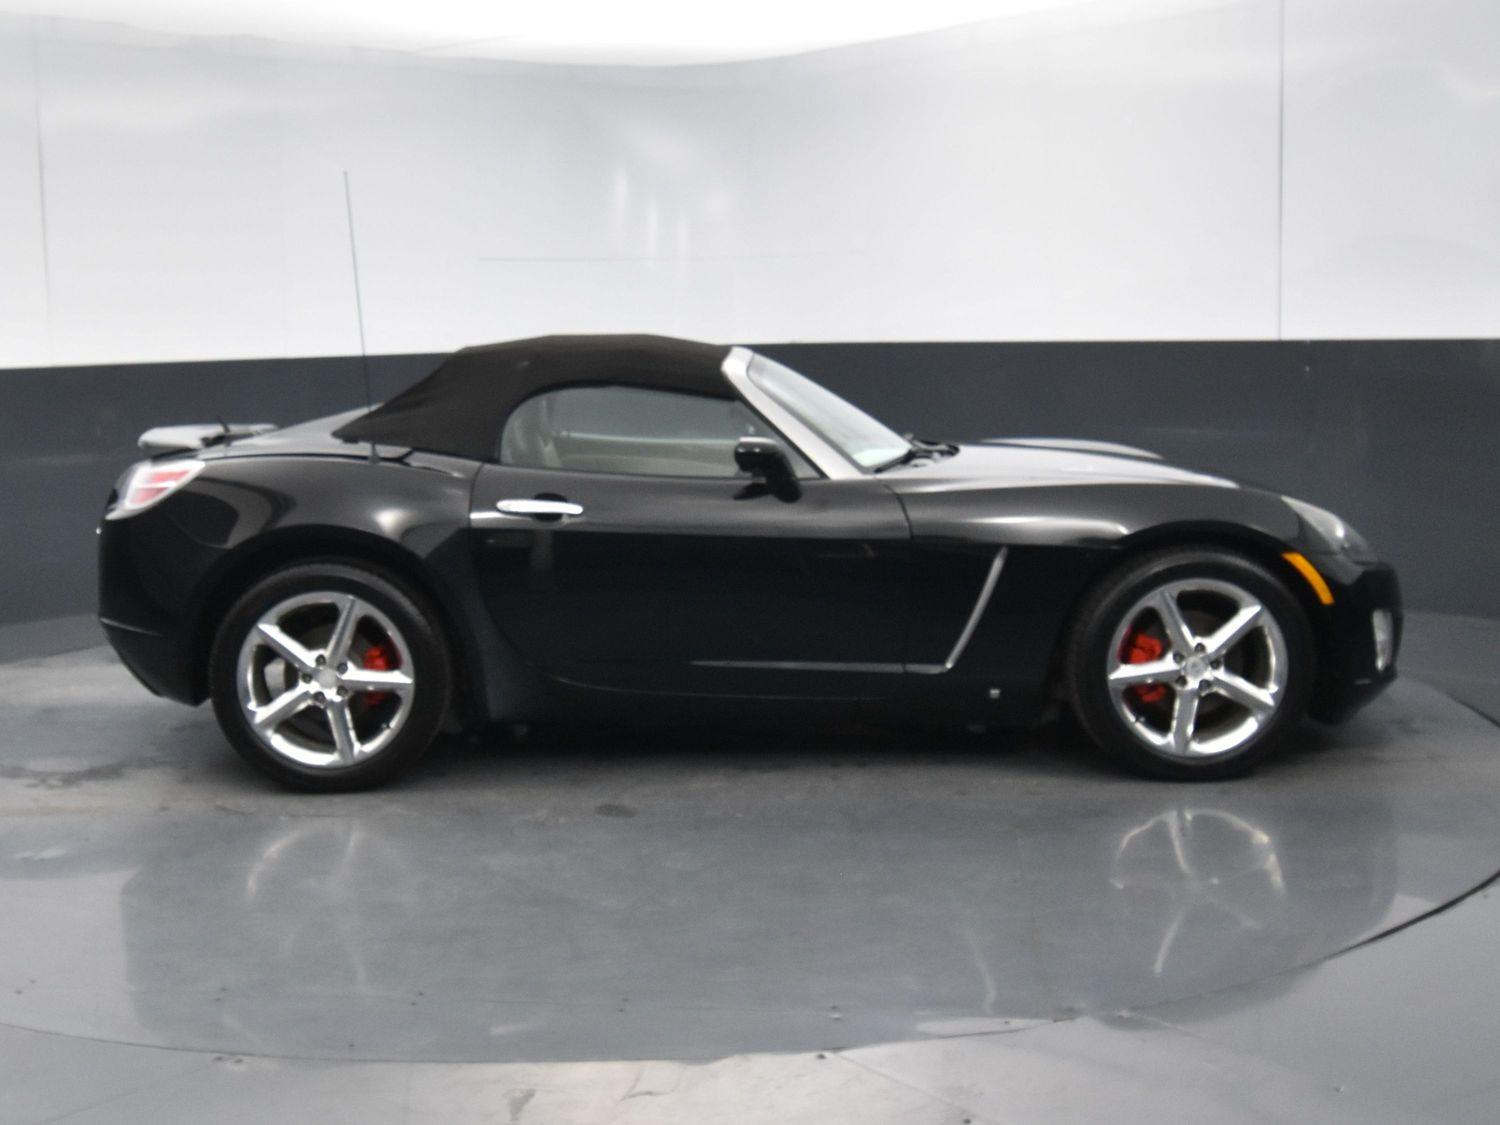 Used 2008 Saturn Sky Red Line Convertible for sale in Grand Island NE